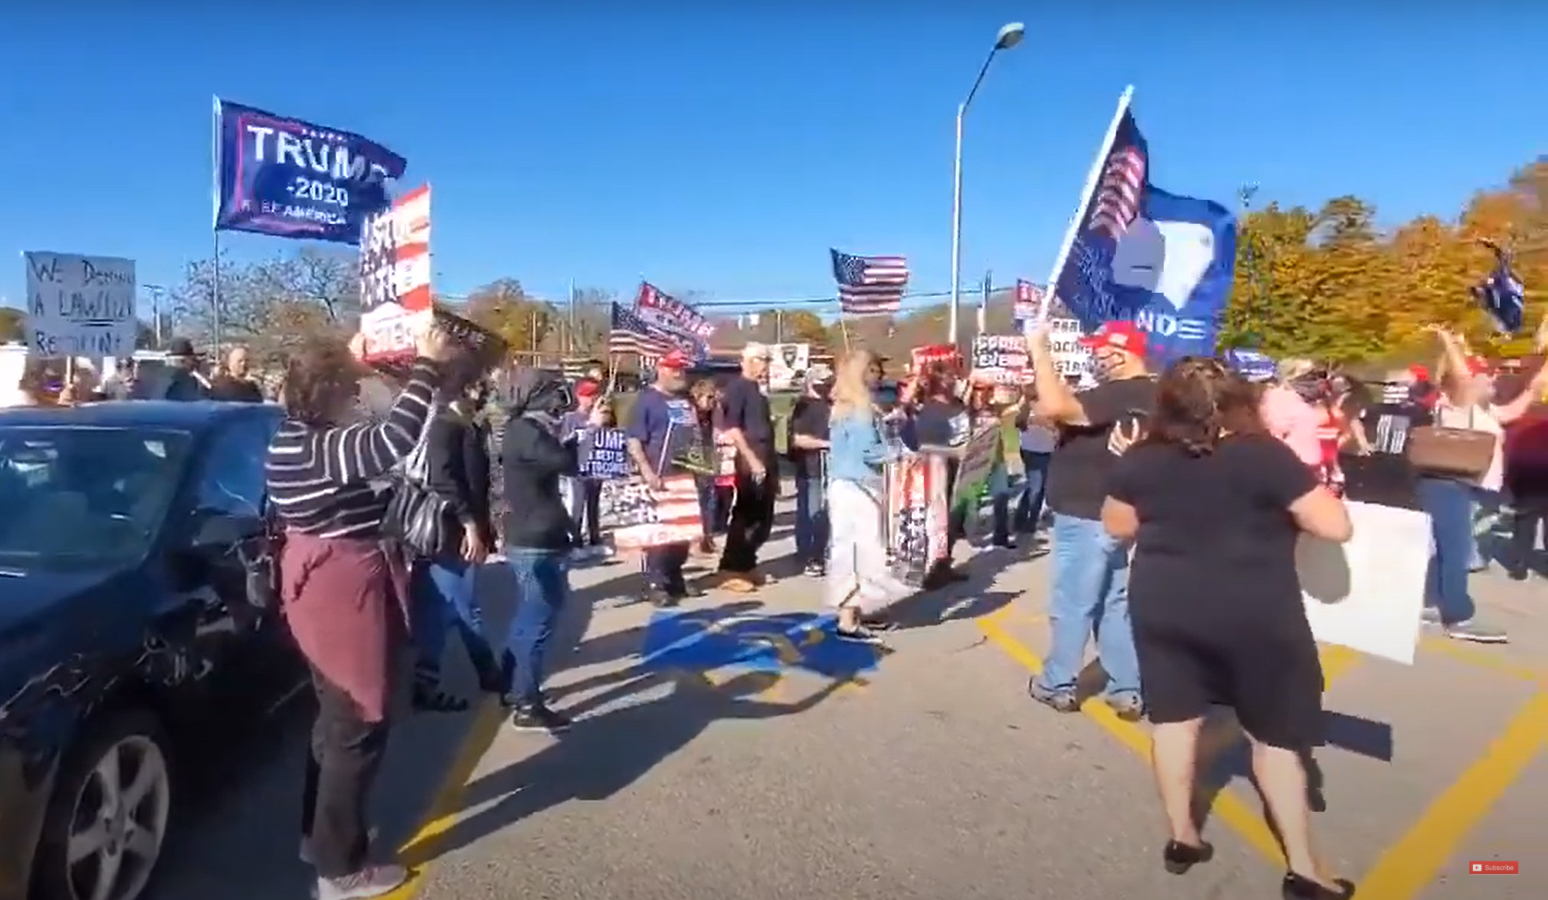 [Video] Trump supporters protesting and demanding recount – Rhode Island